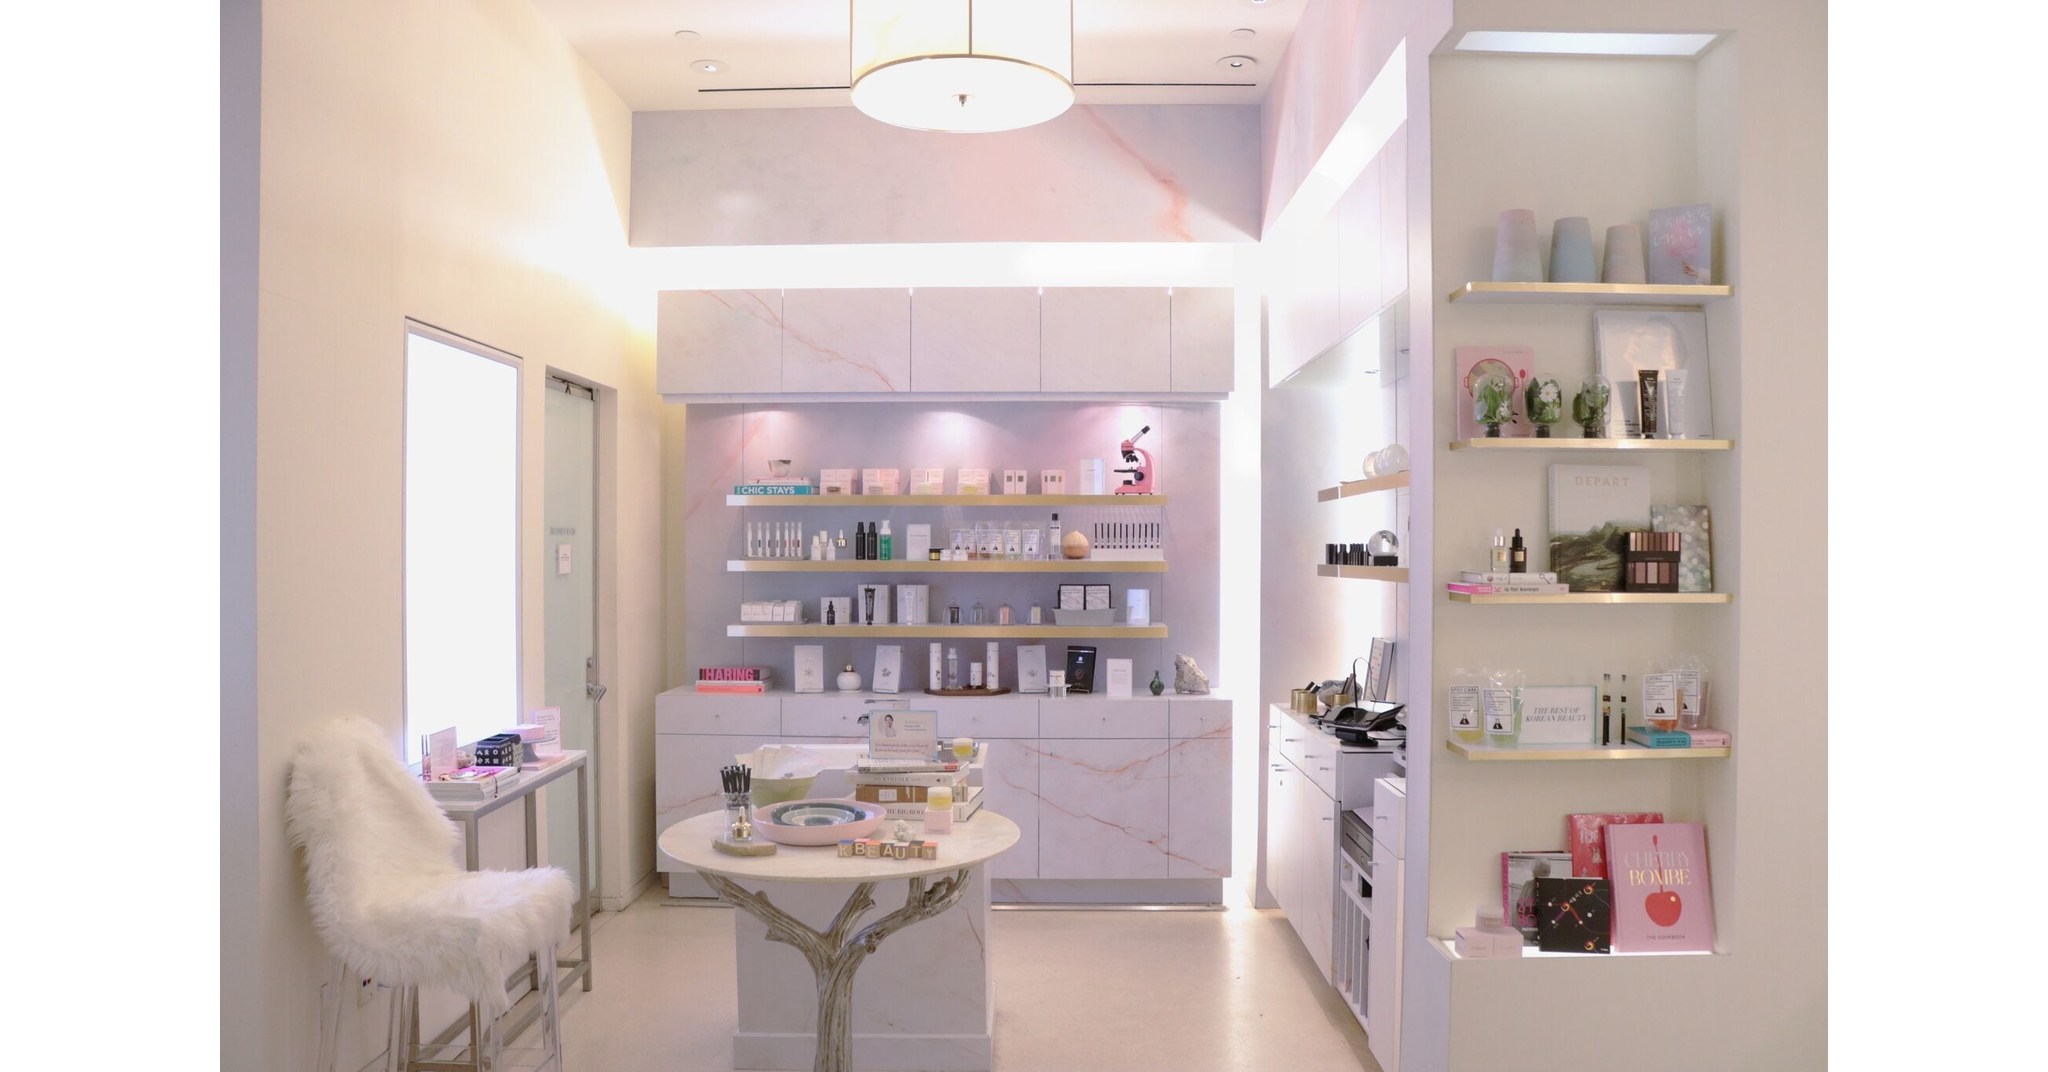 Peach & Lily Brings the Korean Beauty Experience to Bergdorf Goodman